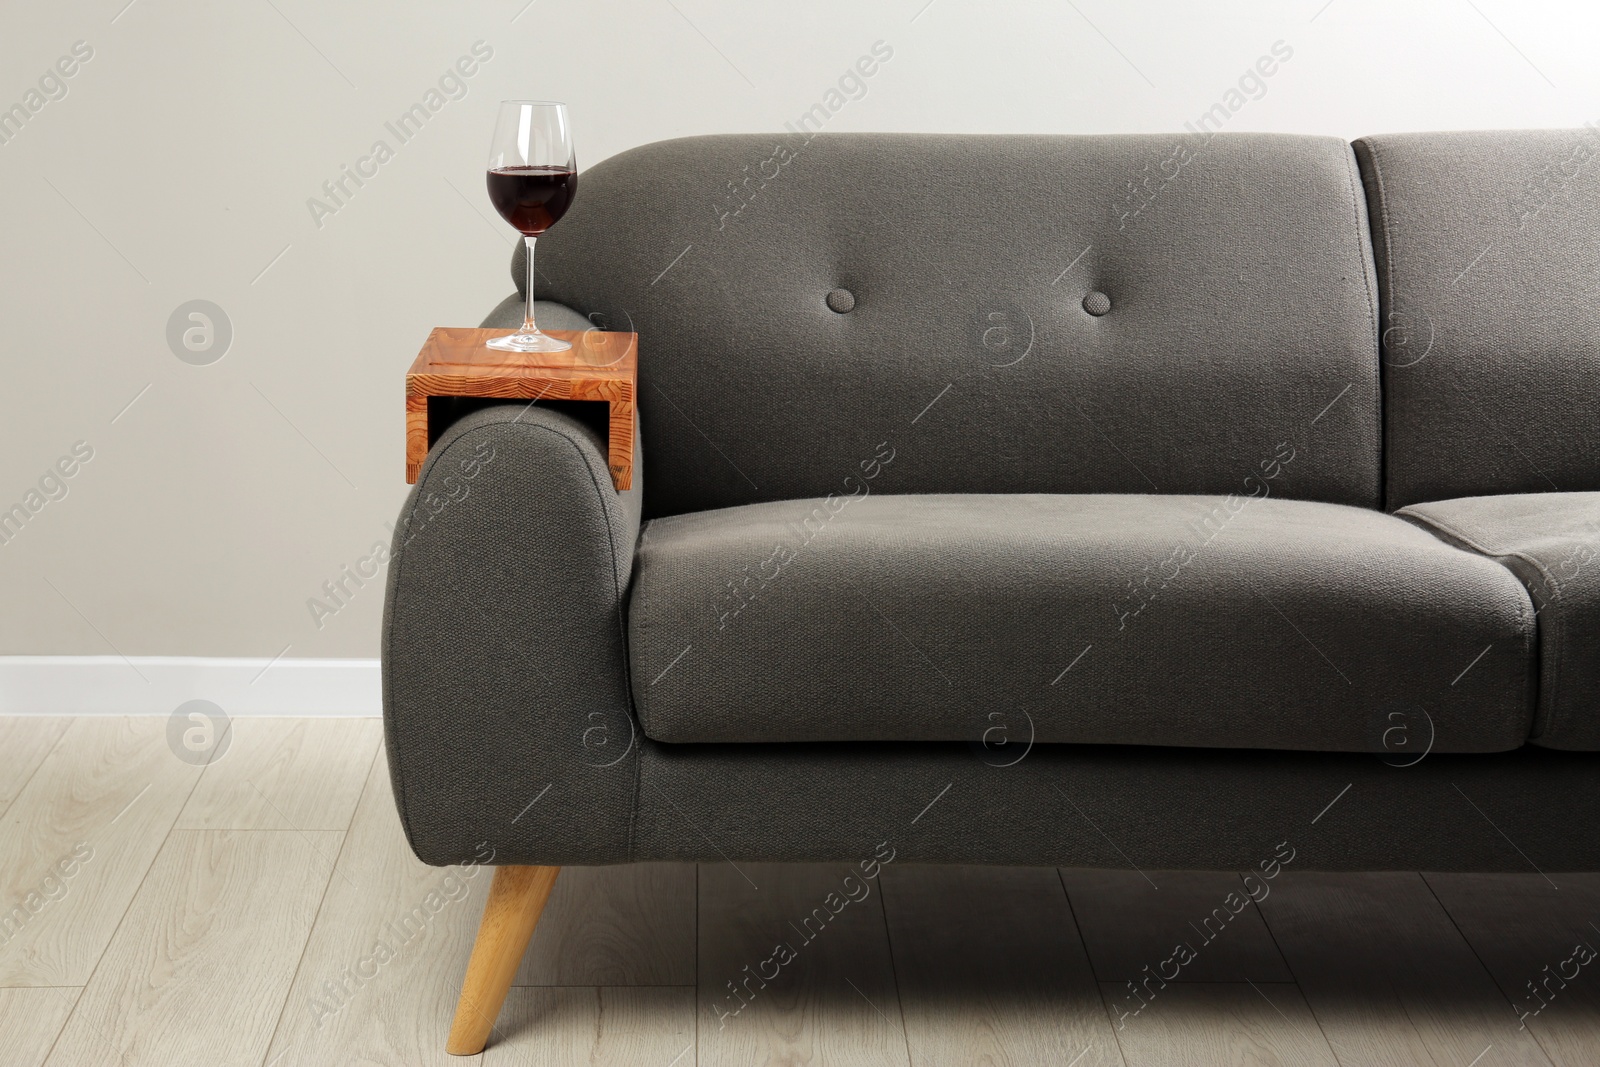 Photo of Glass of red wine on sofa with wooden armrest table in room. Interior element